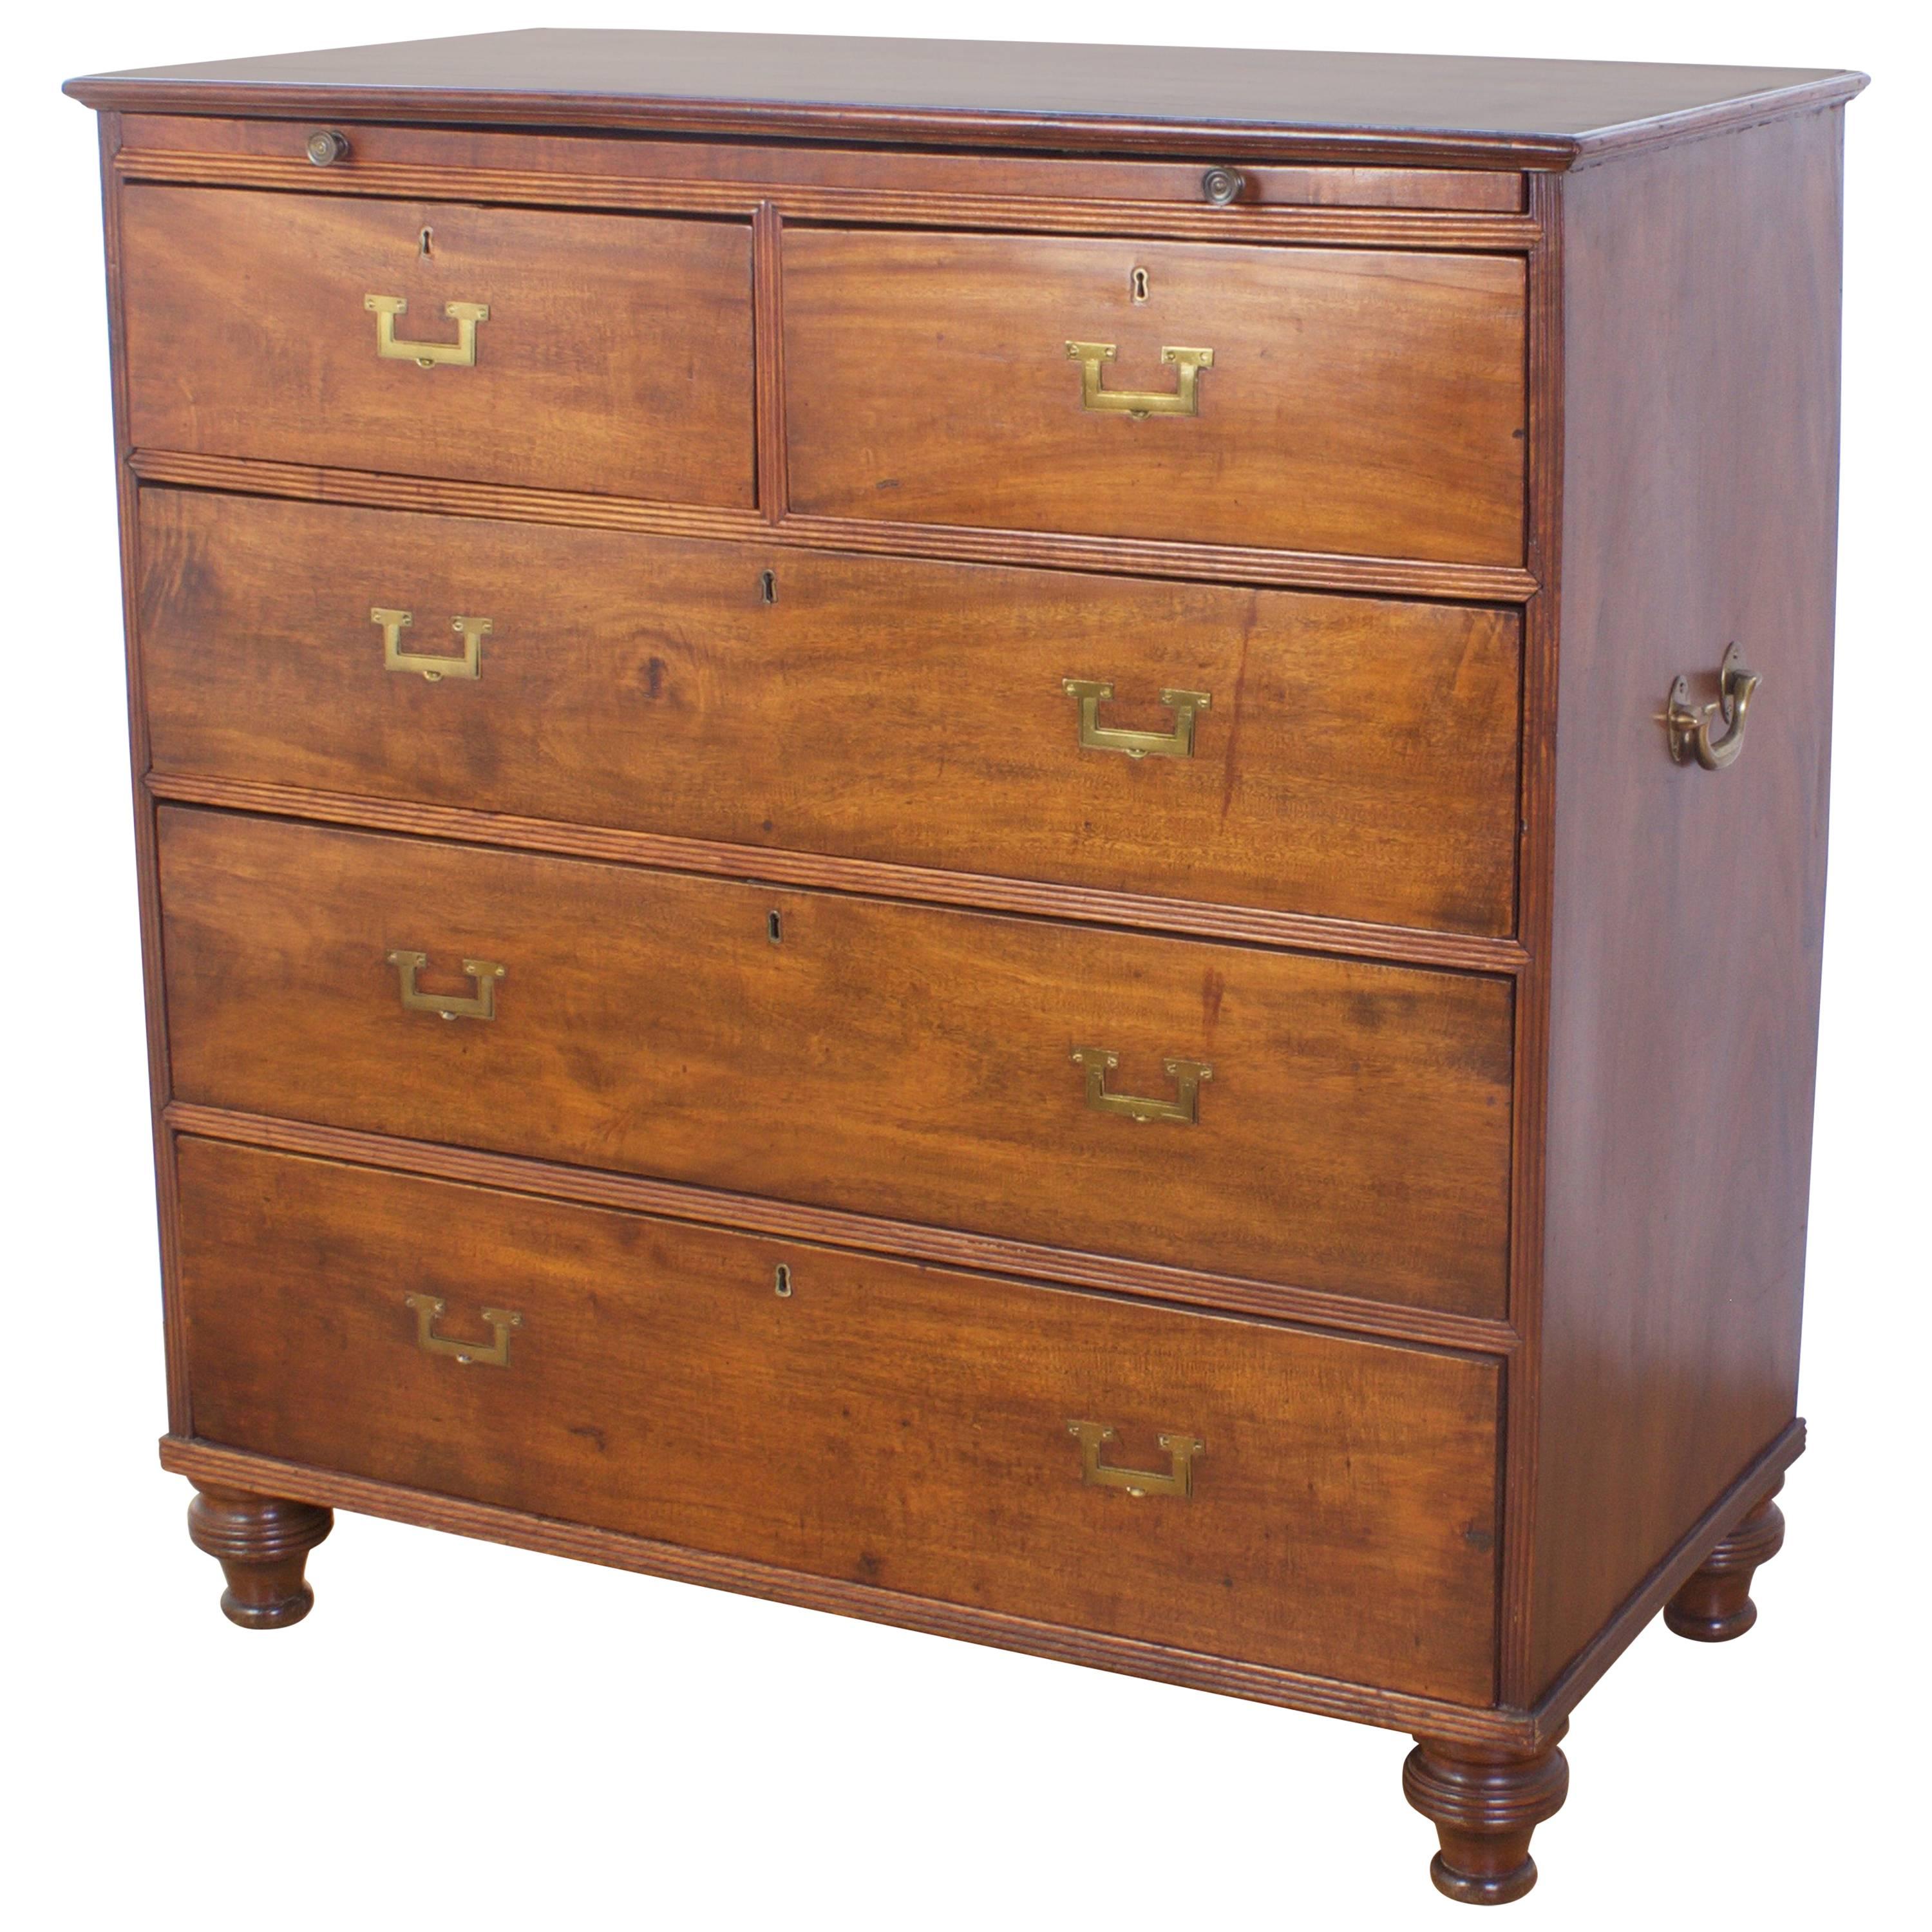 Antique Campaign English Chest of Drawers in Mahogany